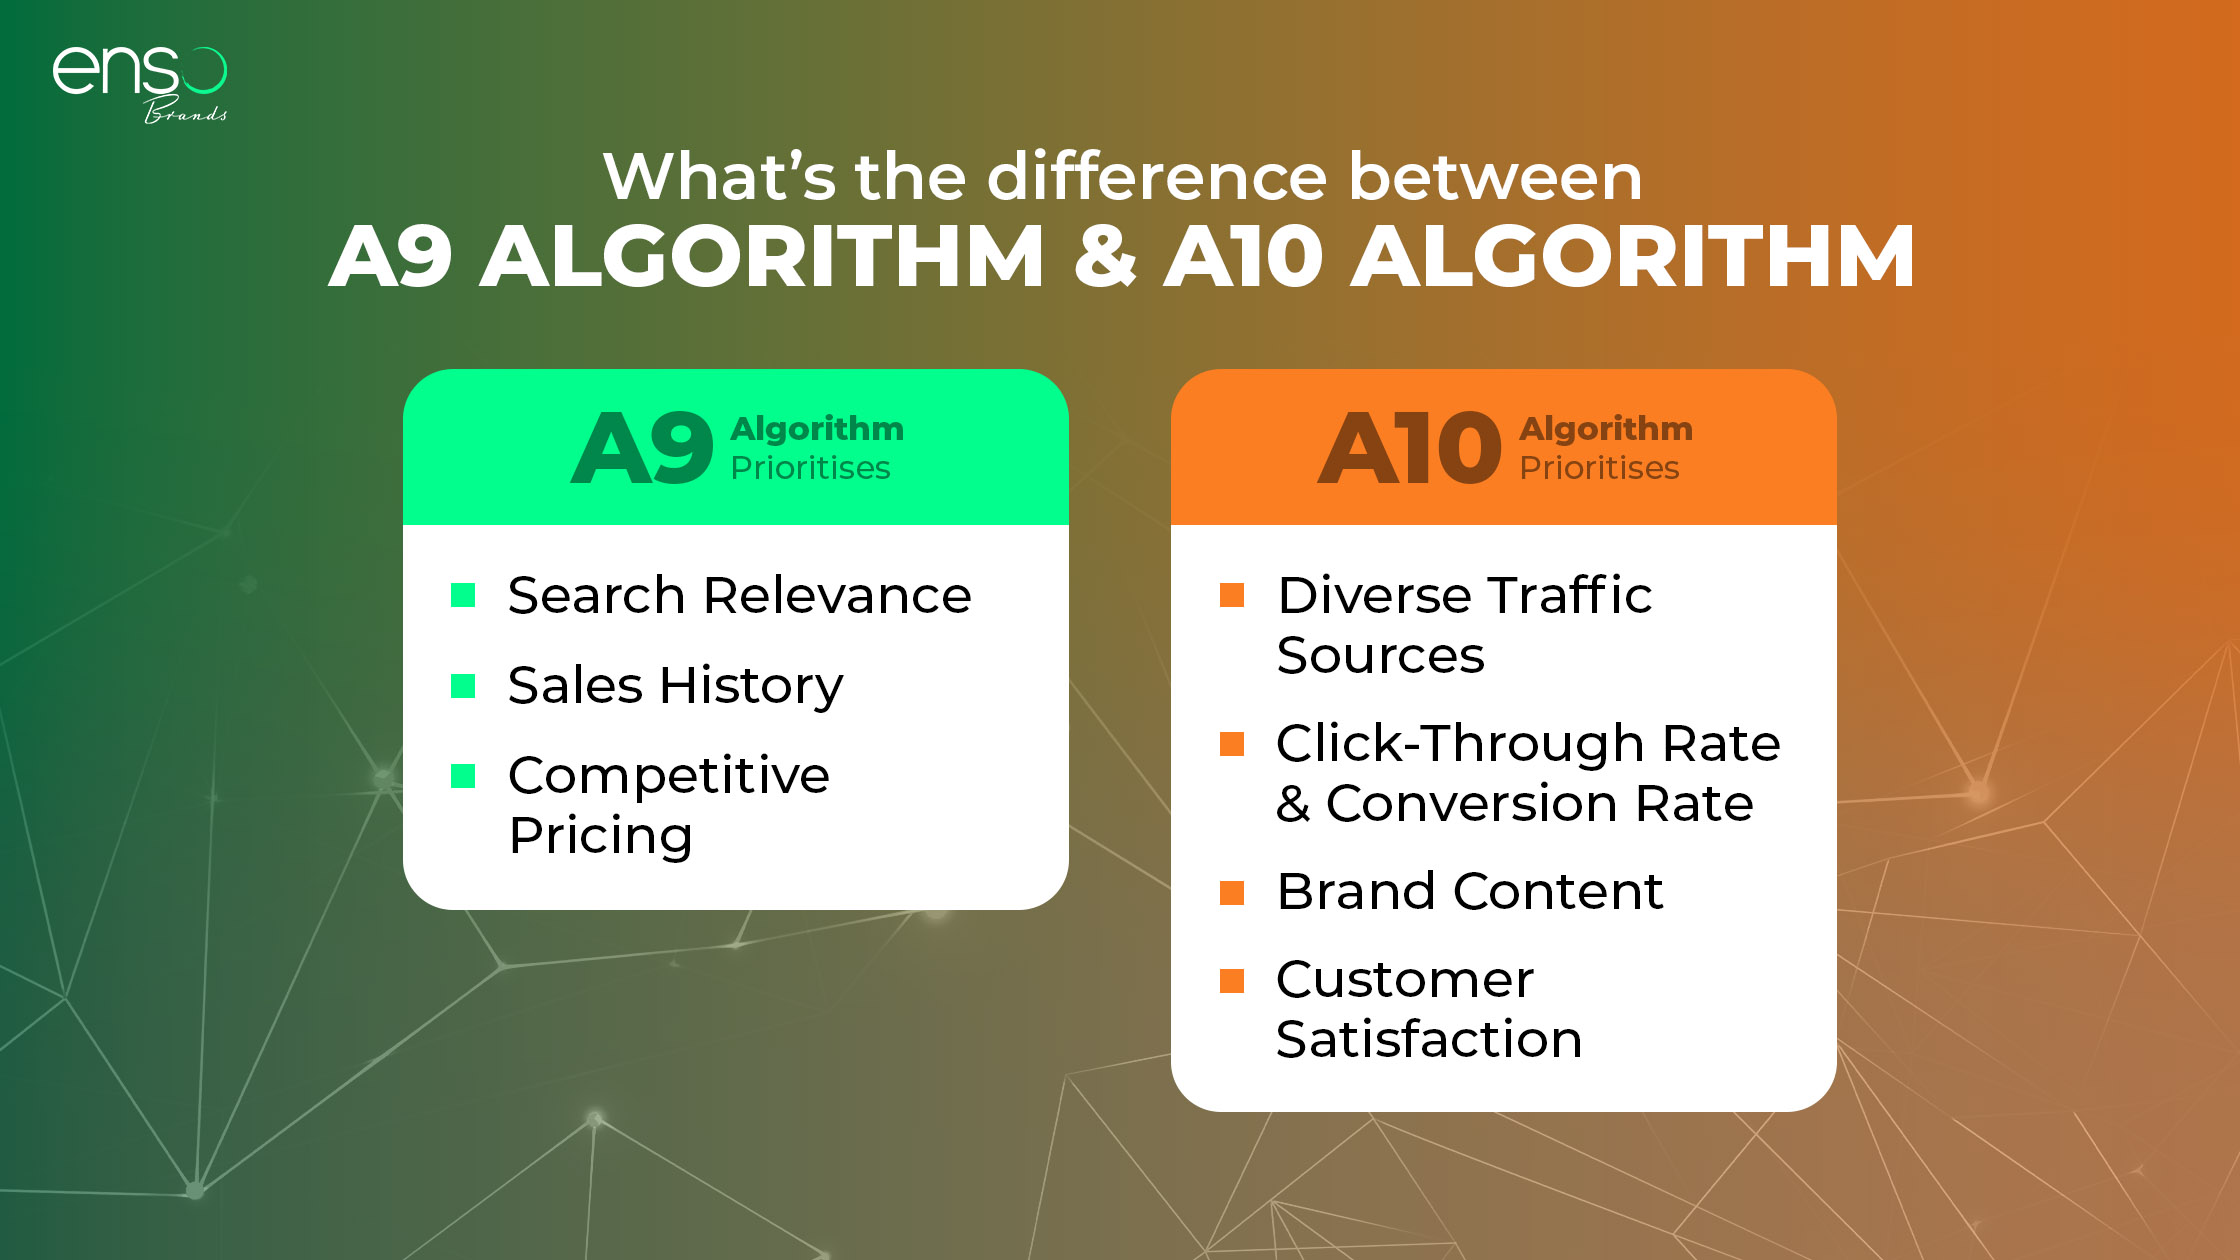 what's the difference between the A9 and A10 algorithm